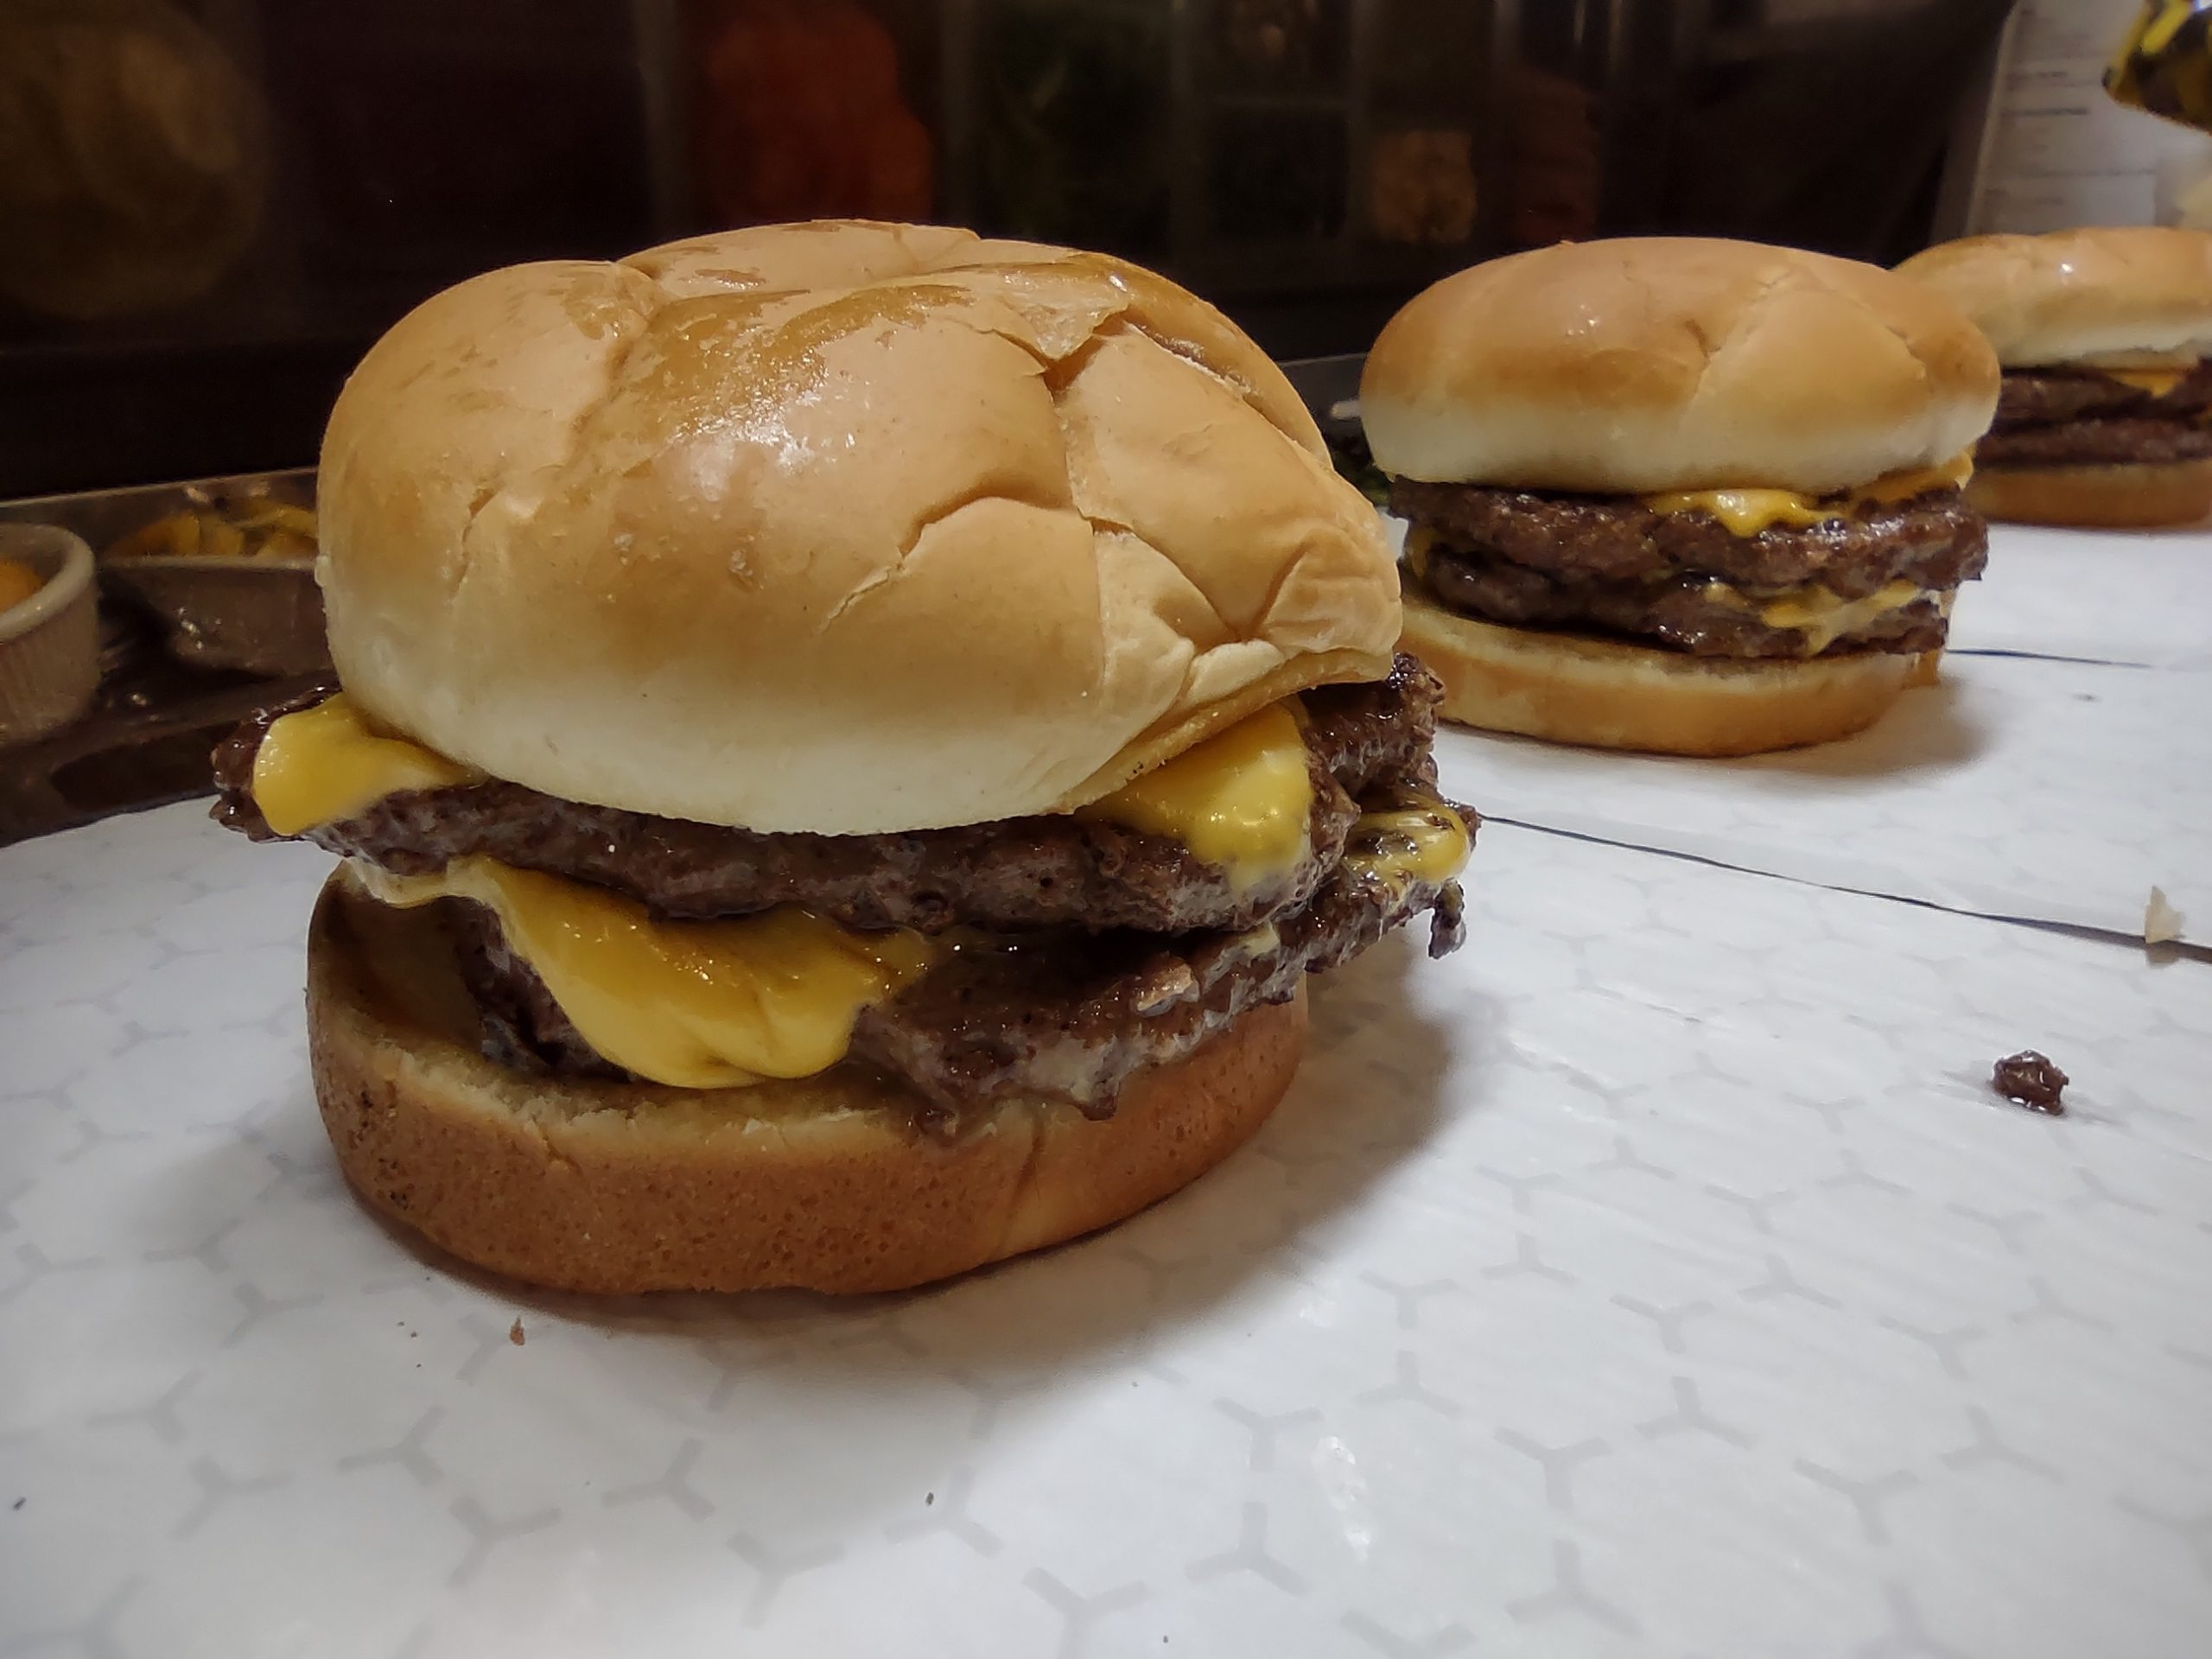 Happier Adult Meal - Double cheeseburger